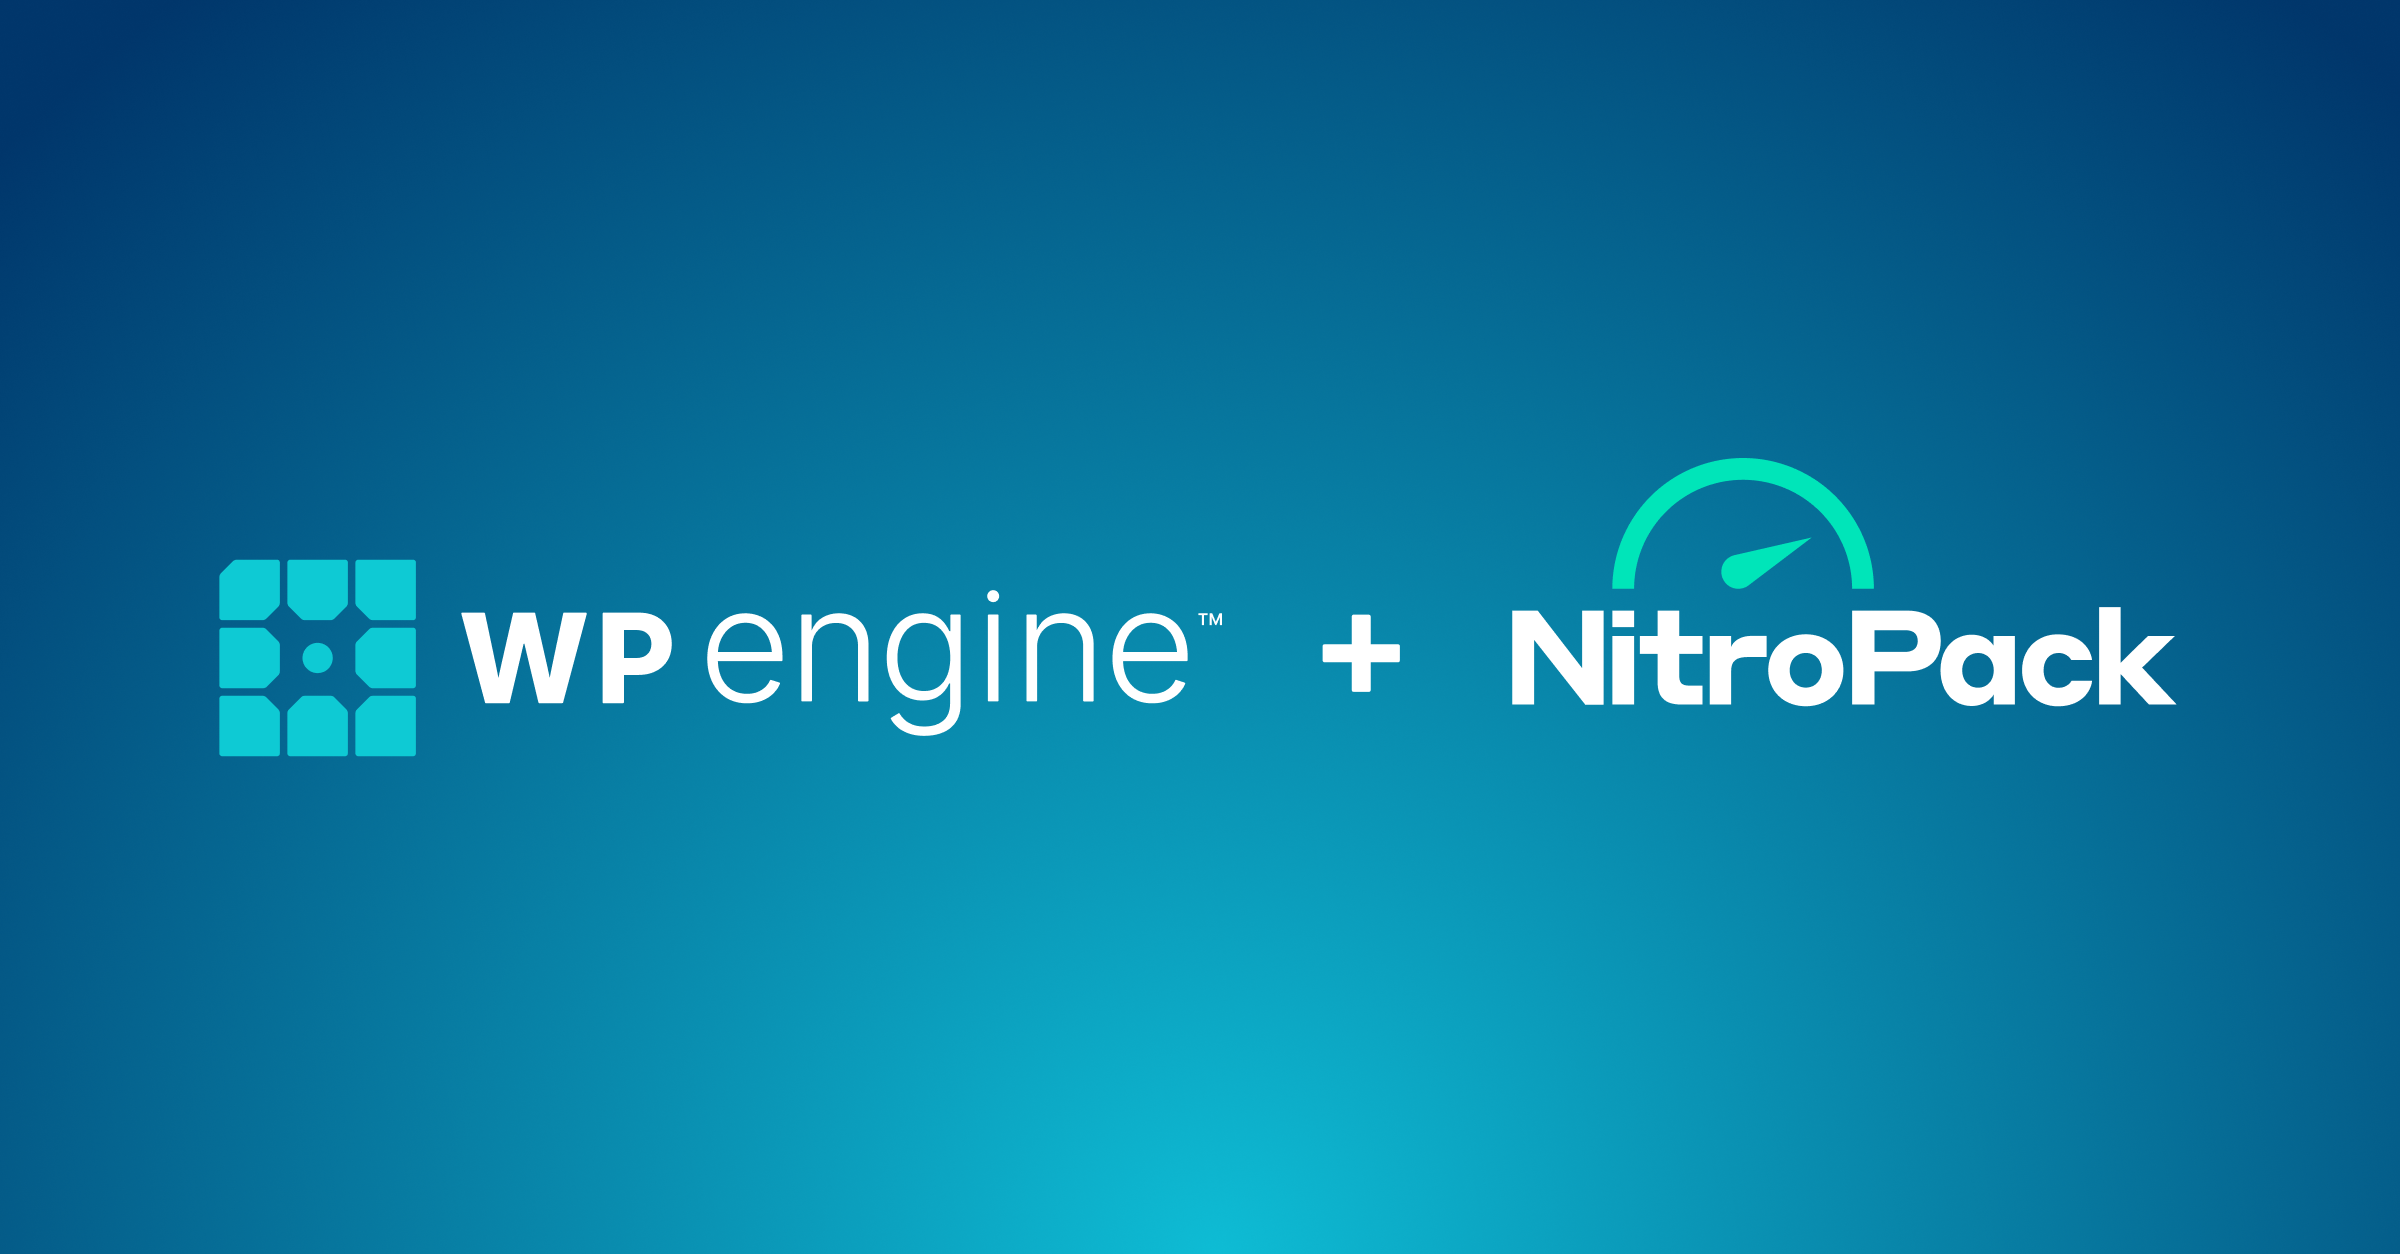 WP Engine acquires NitroPack, extending leadership in managed WordPress site performance